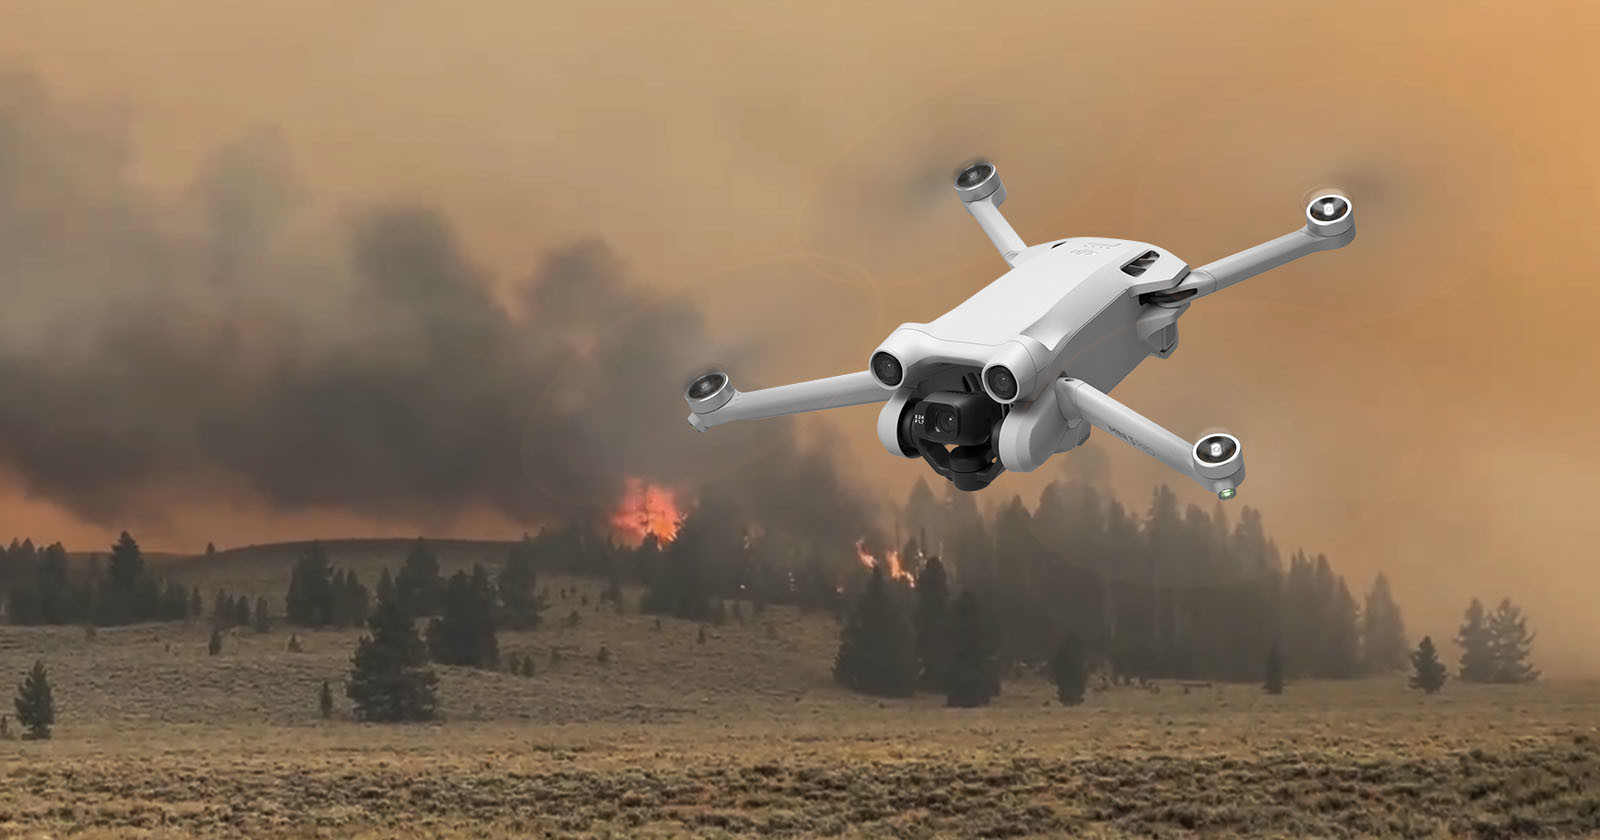  drone flies extremely close firefighting helicopters idaho 